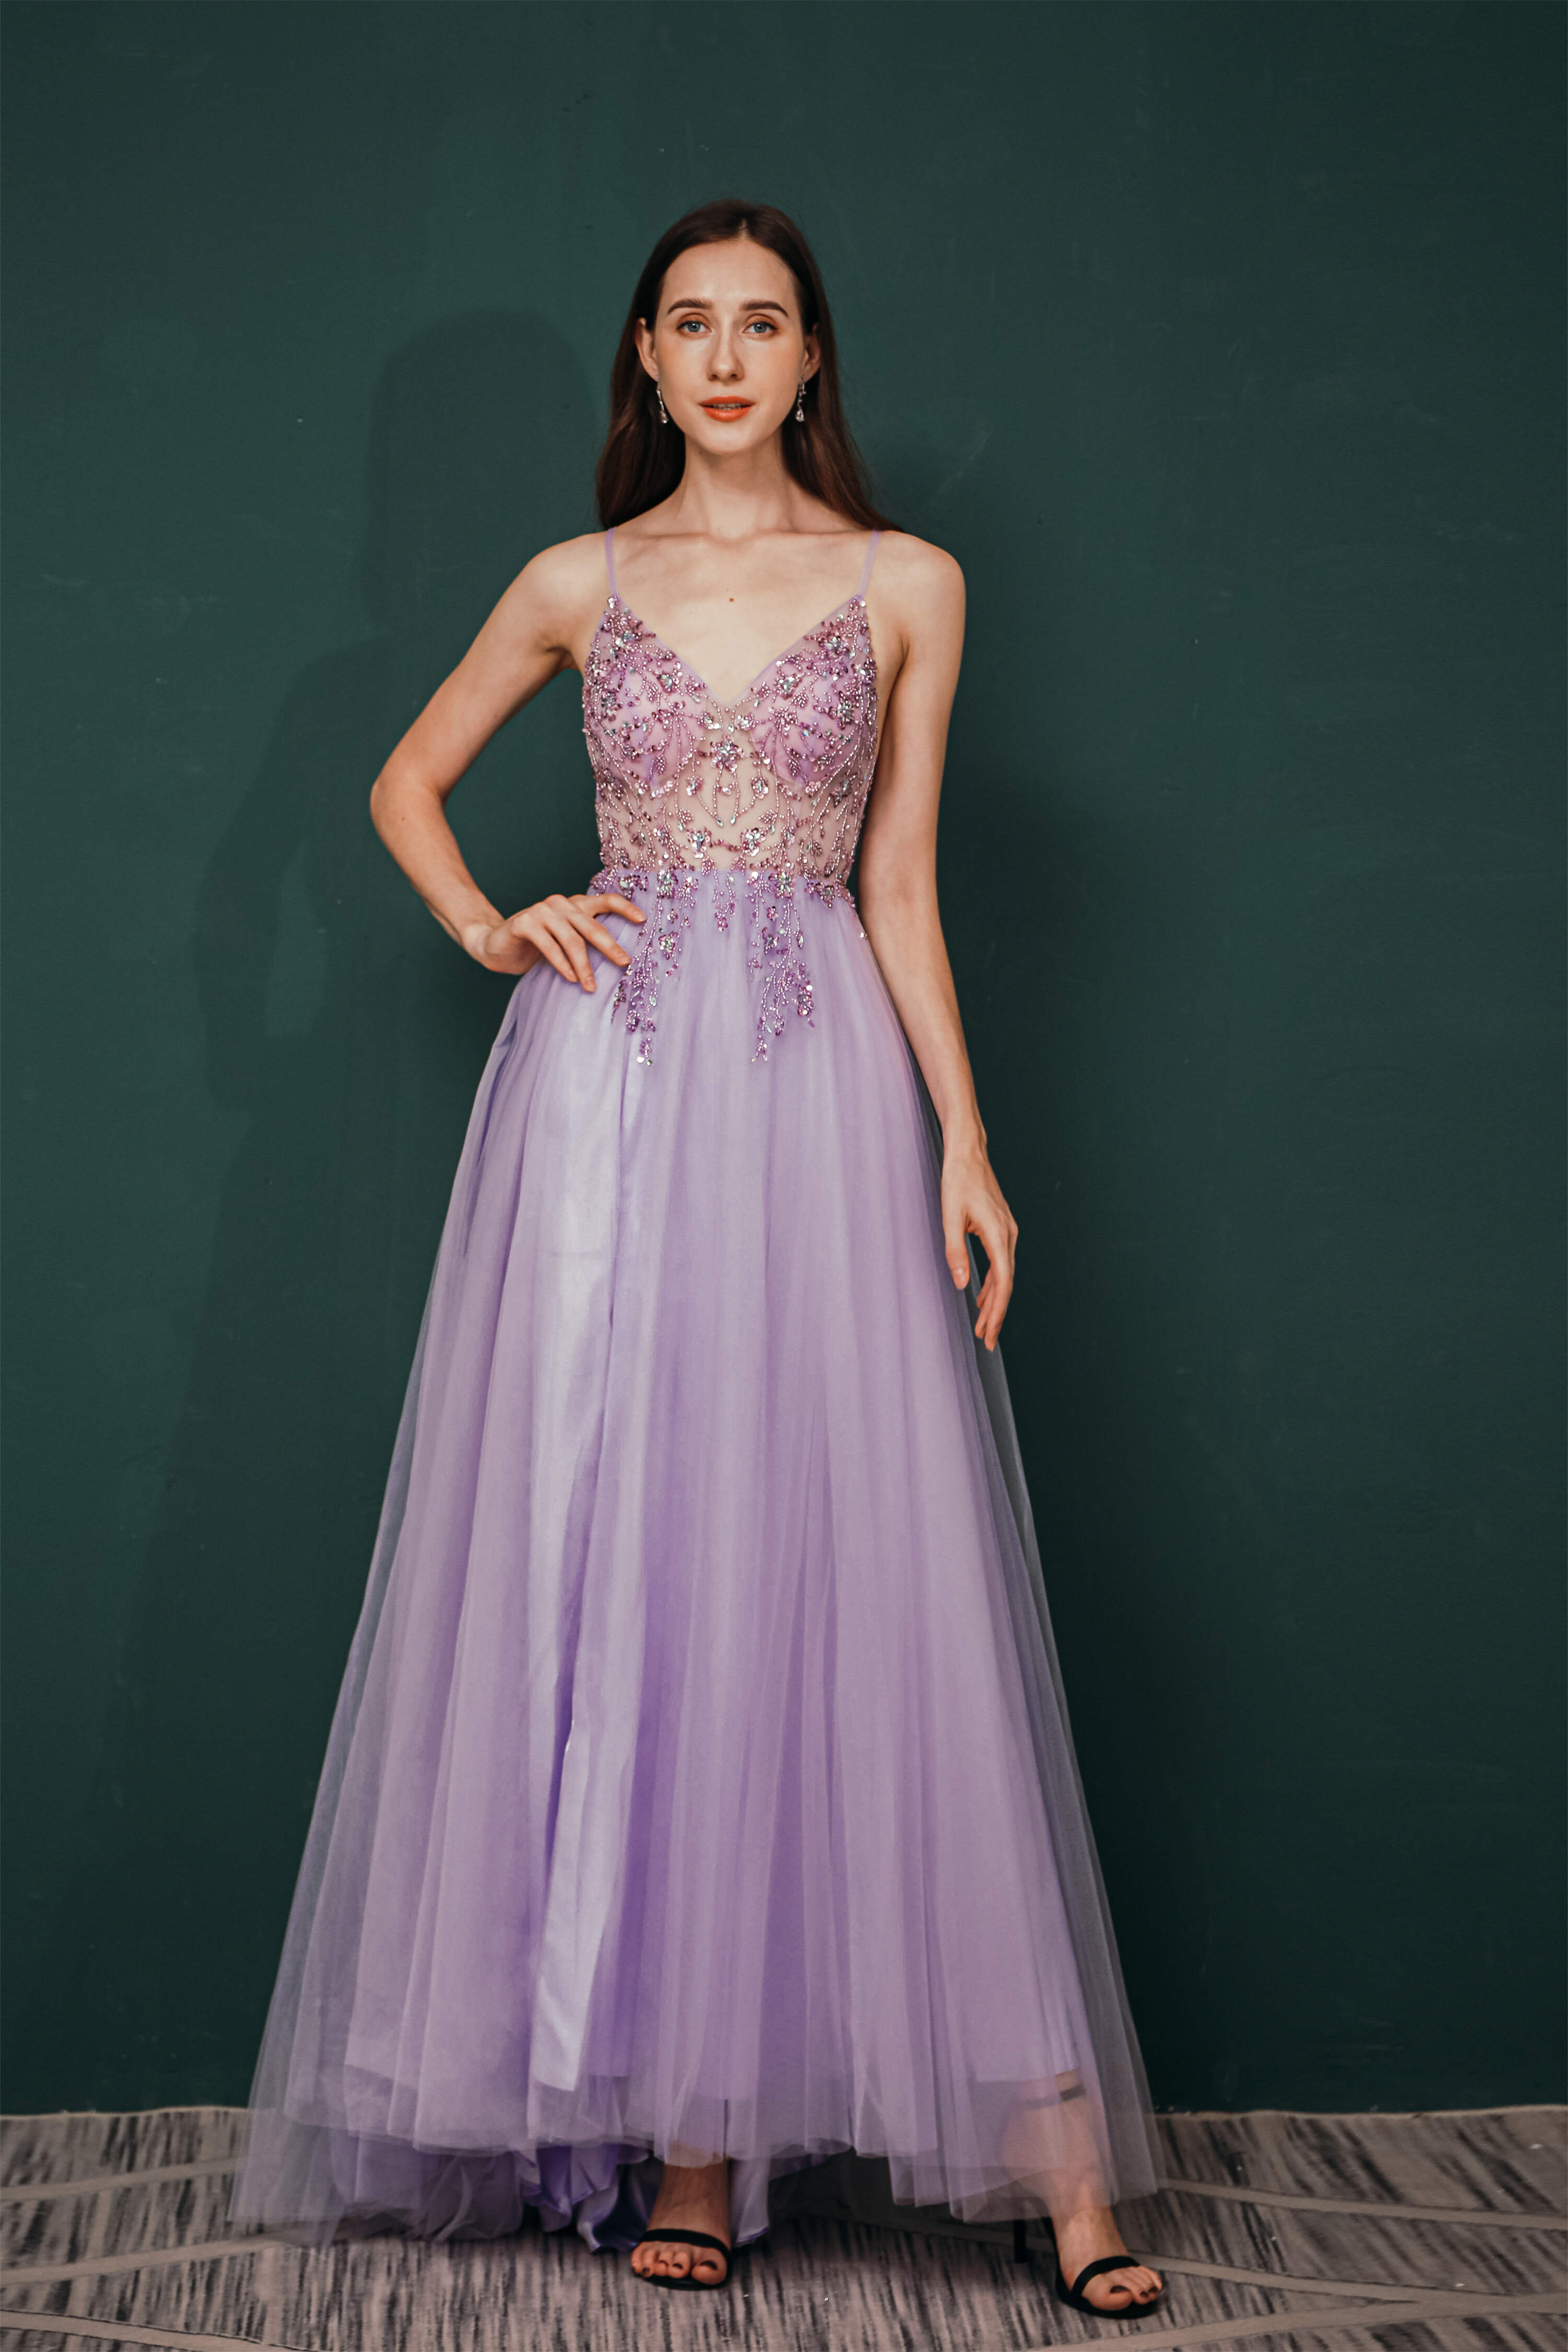 Party Dress Spring, Stunning Front Split Spaghetti Straps Long A Line Beaded Prom Dresses